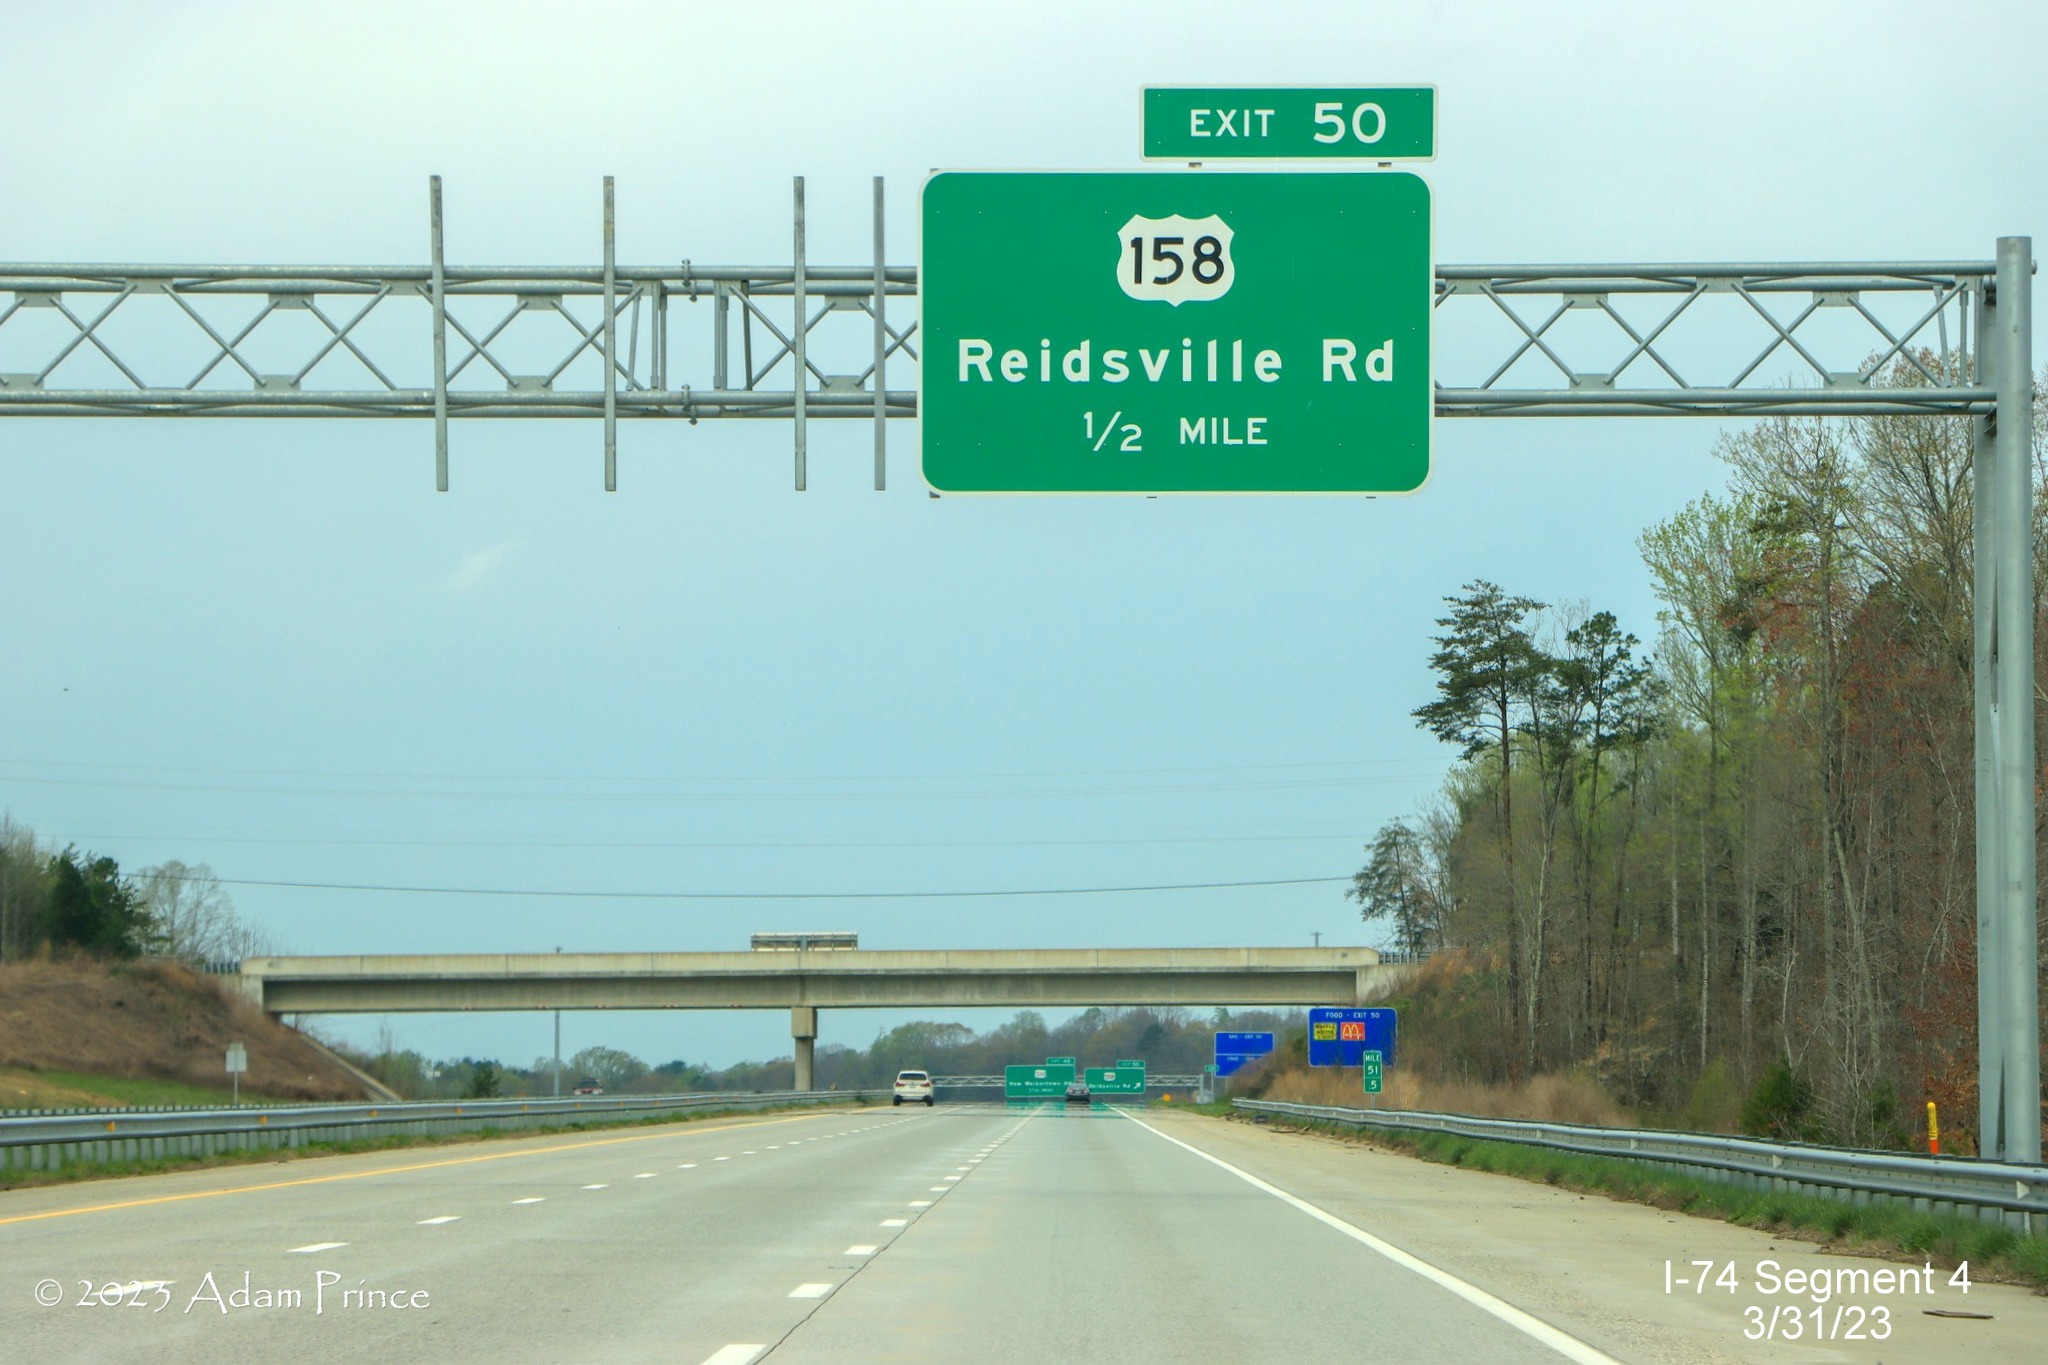 Image of 1/2 mile advance overhead sign for the US 158 exit on NC 74 (Future I-74) West/Winston-Salem 
        Northern Beltway, Adam Prince, March 2023